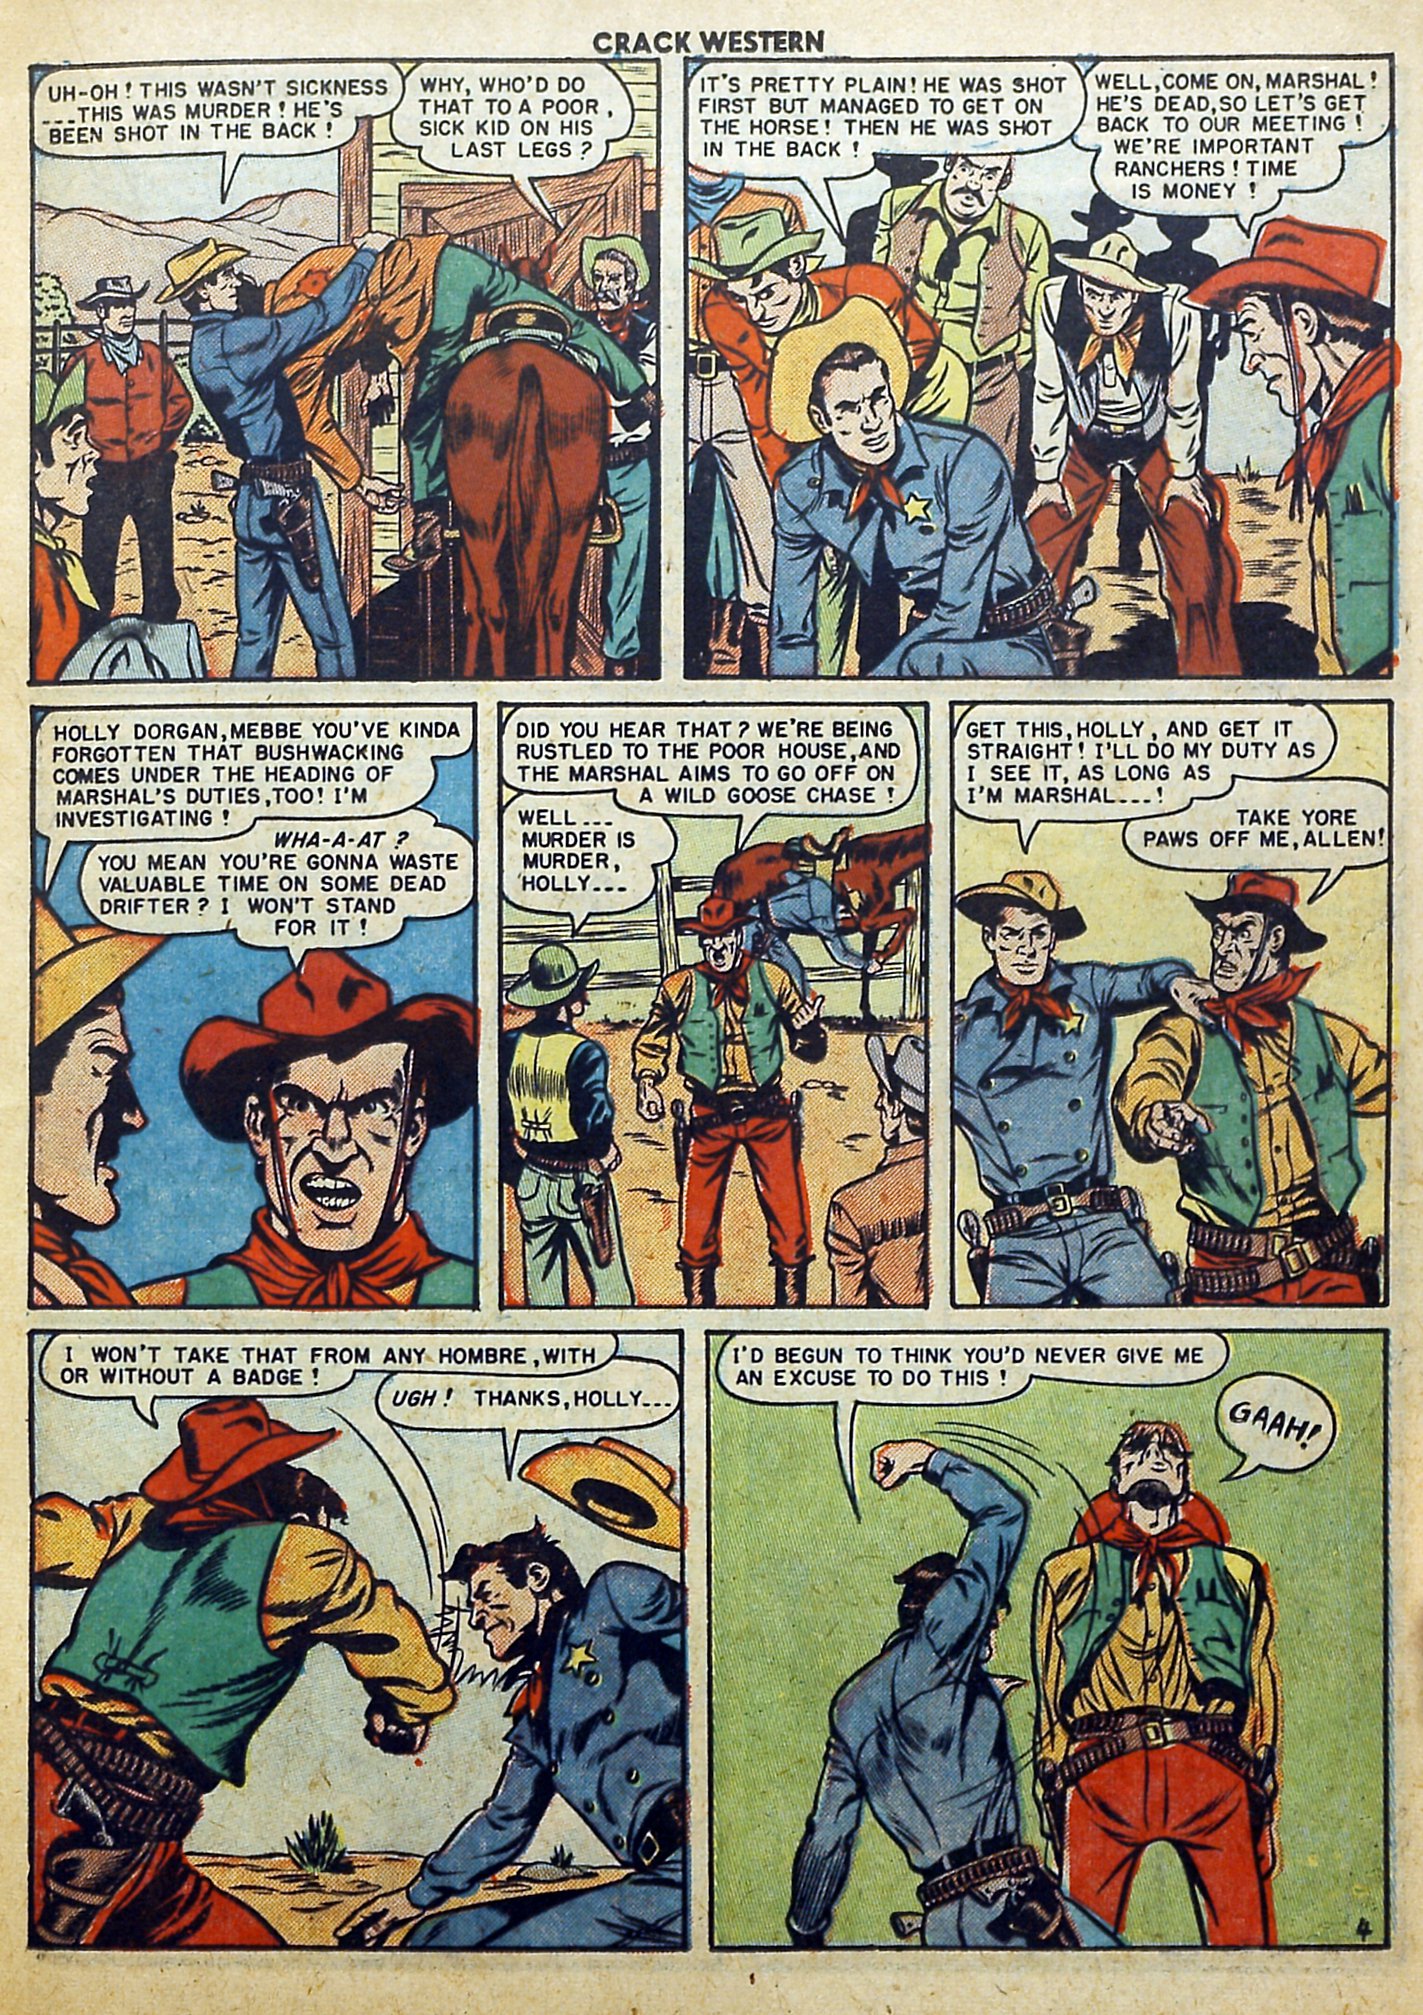 Read online Crack Western comic -  Issue #69 - 19